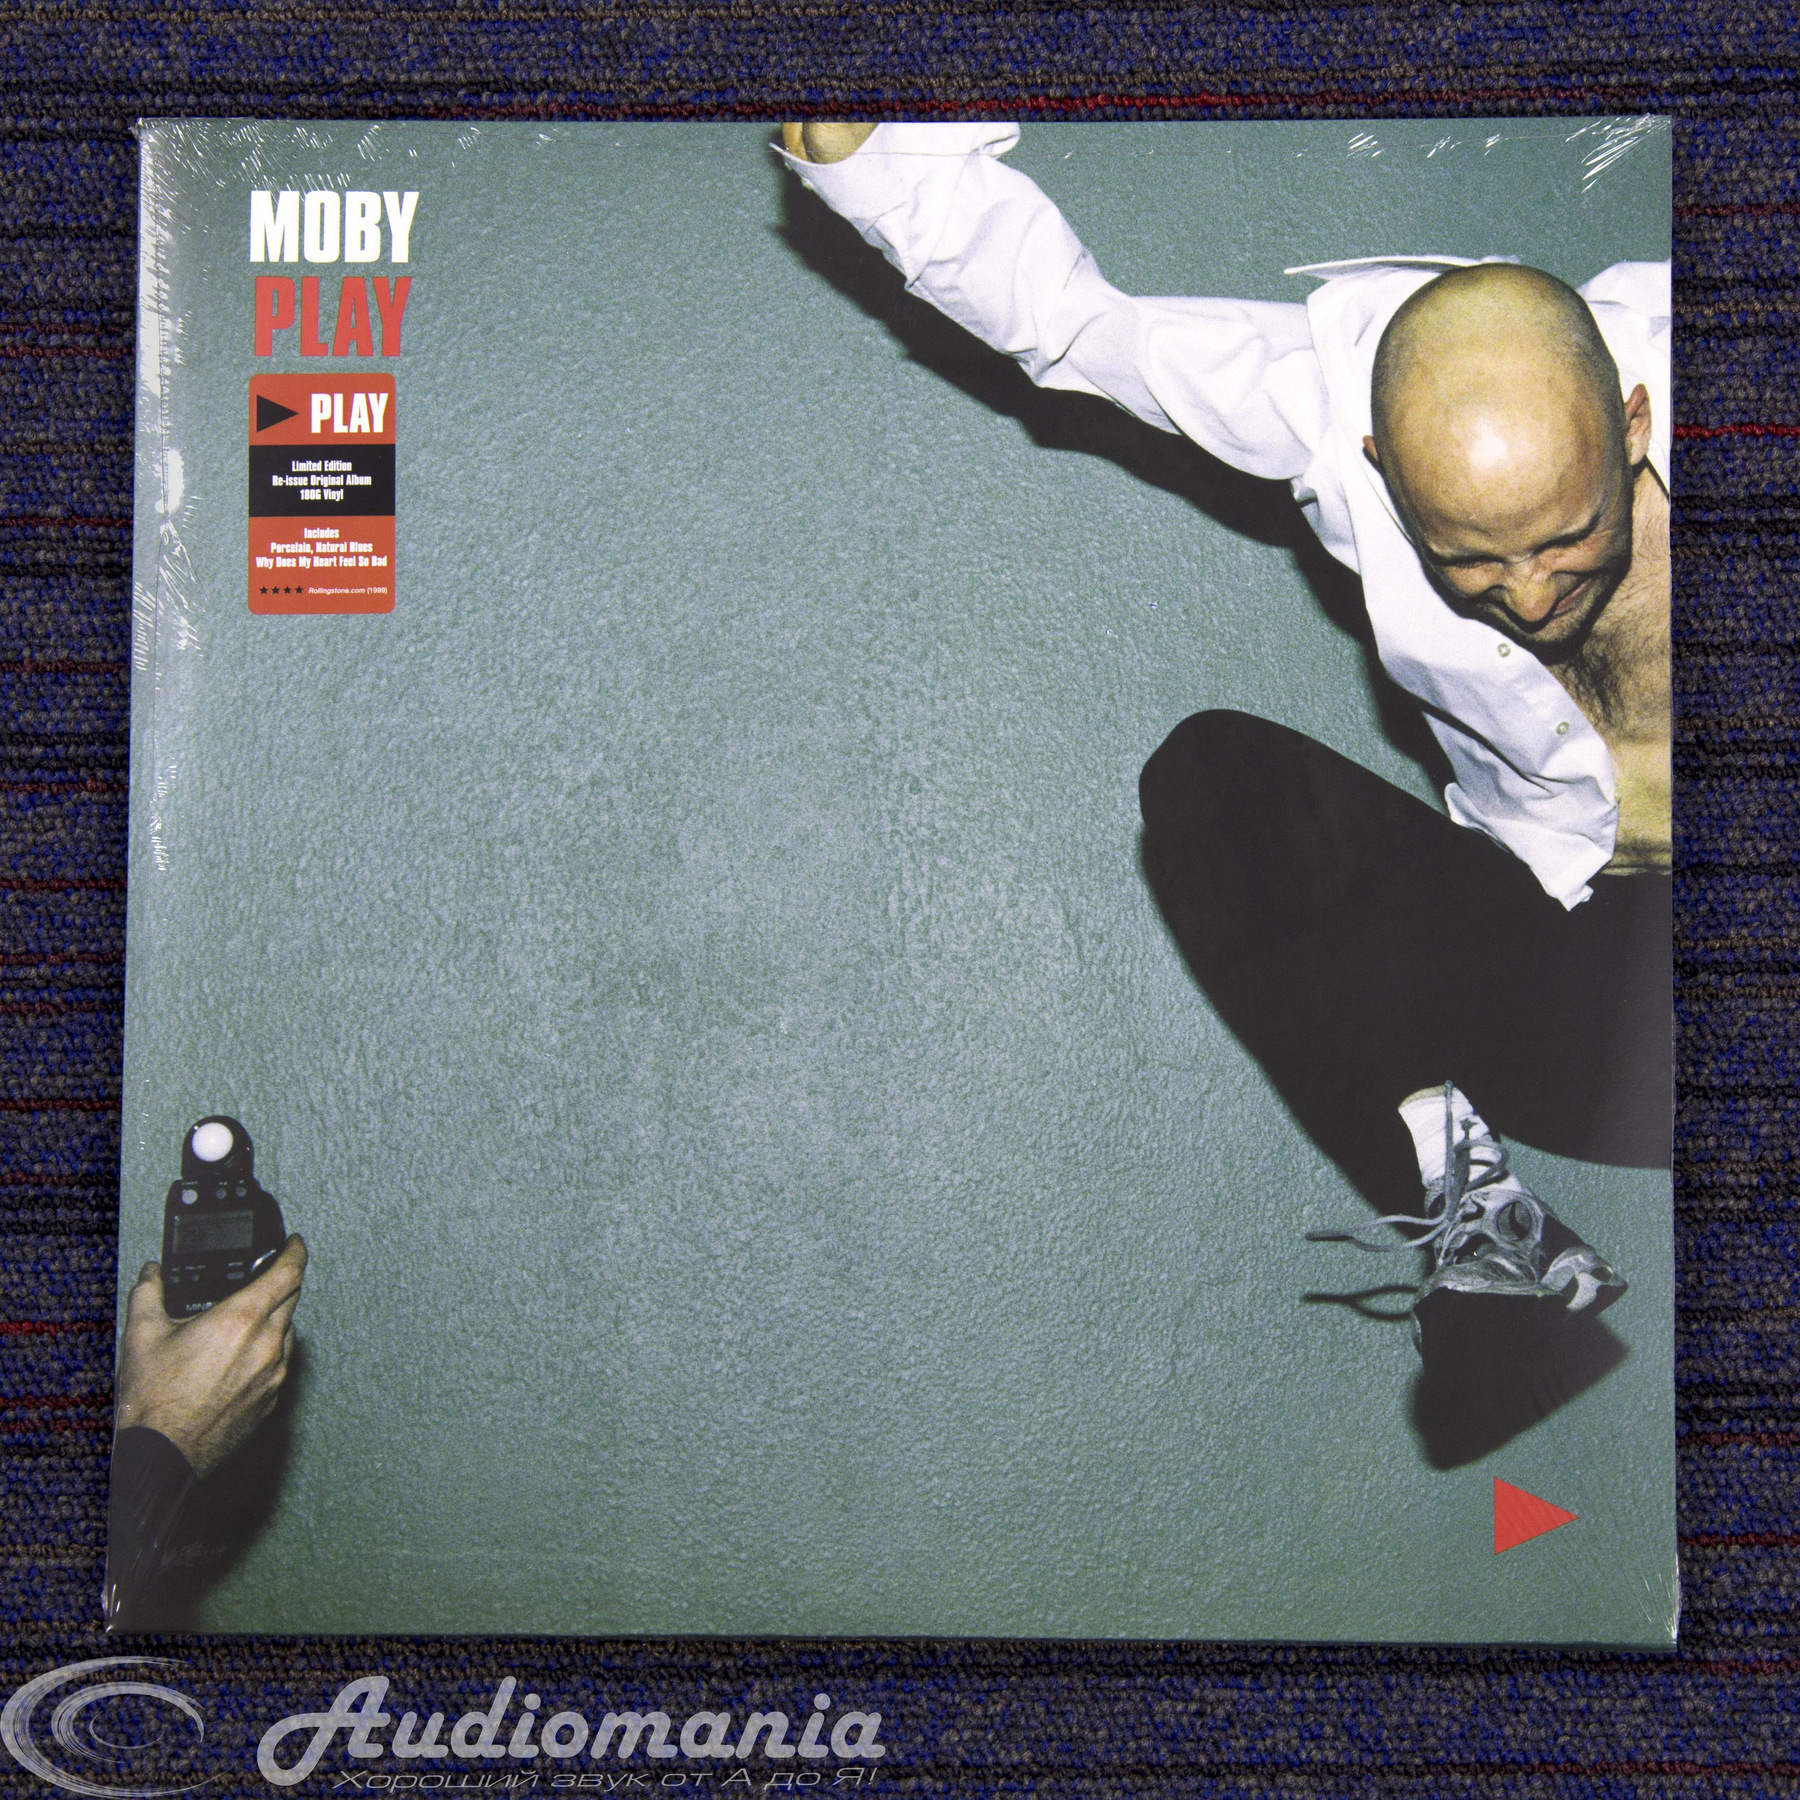 Moby play. Play Moby пластинка. Виниловые пластинки Moby. Moby альбомы.